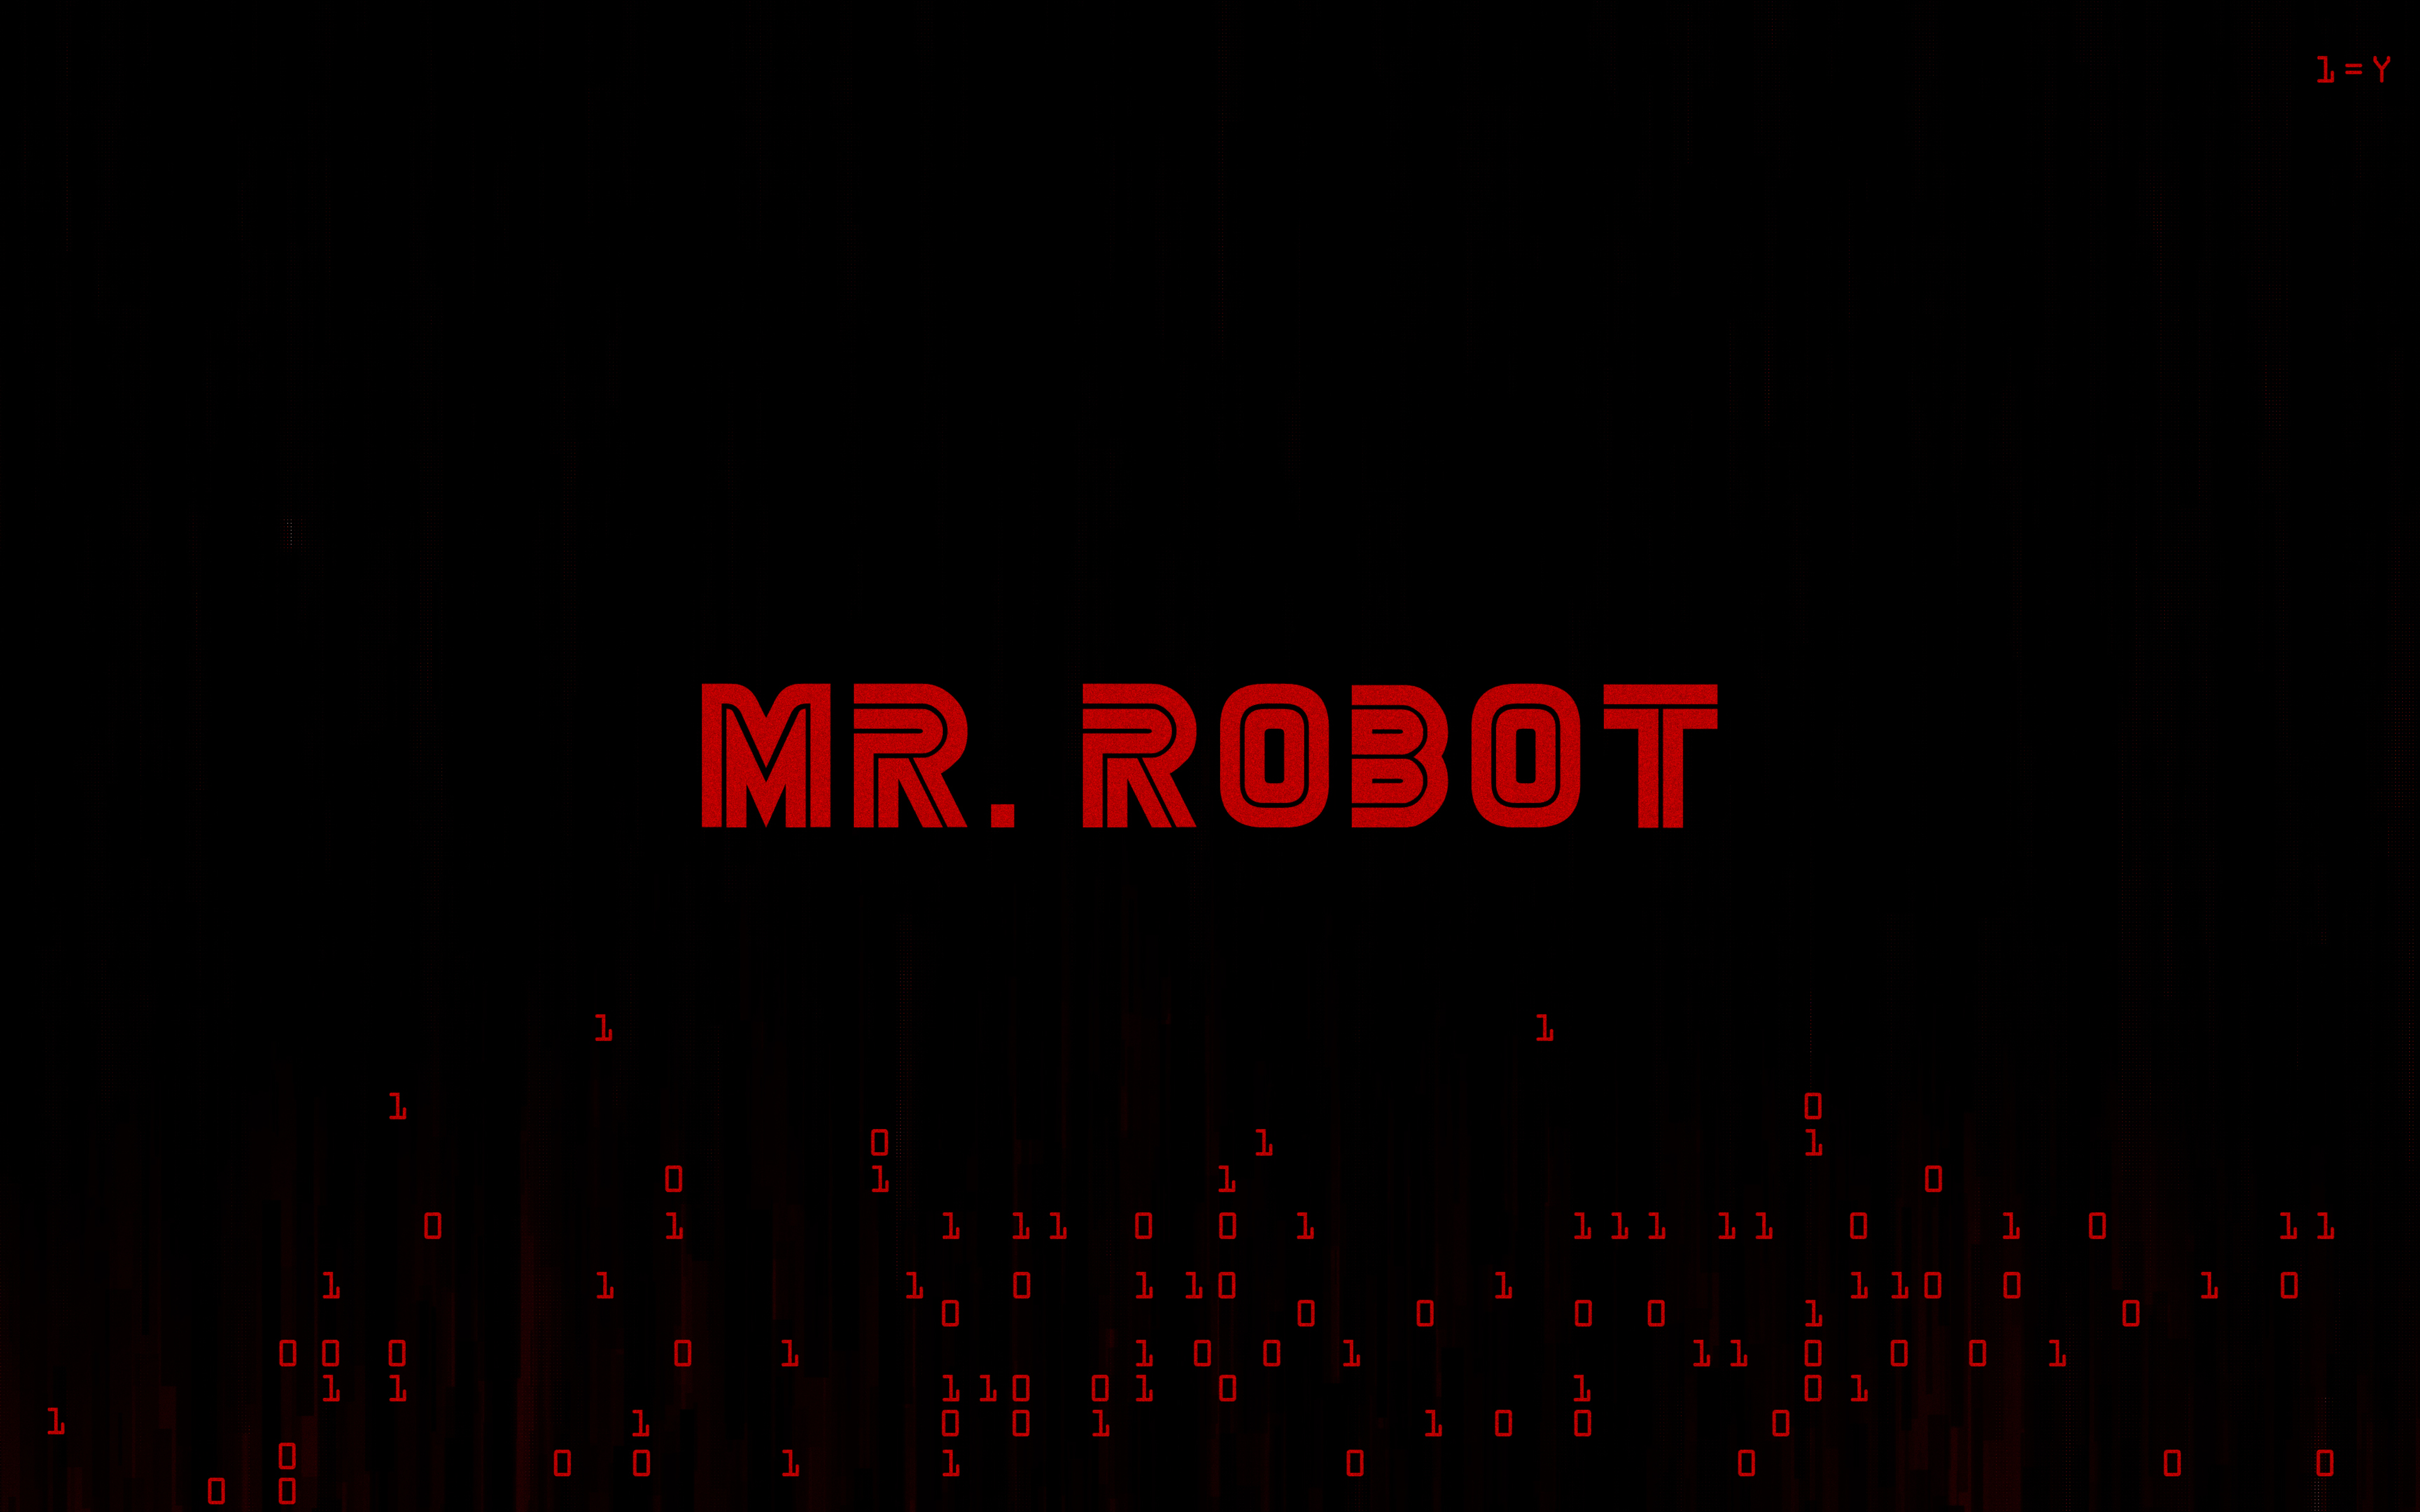 Mr Robot Logo Wallpaper,HD Tv Shows Wallpapers,4k Wallpapers,Images, Backgrounds,Photos and Pictures